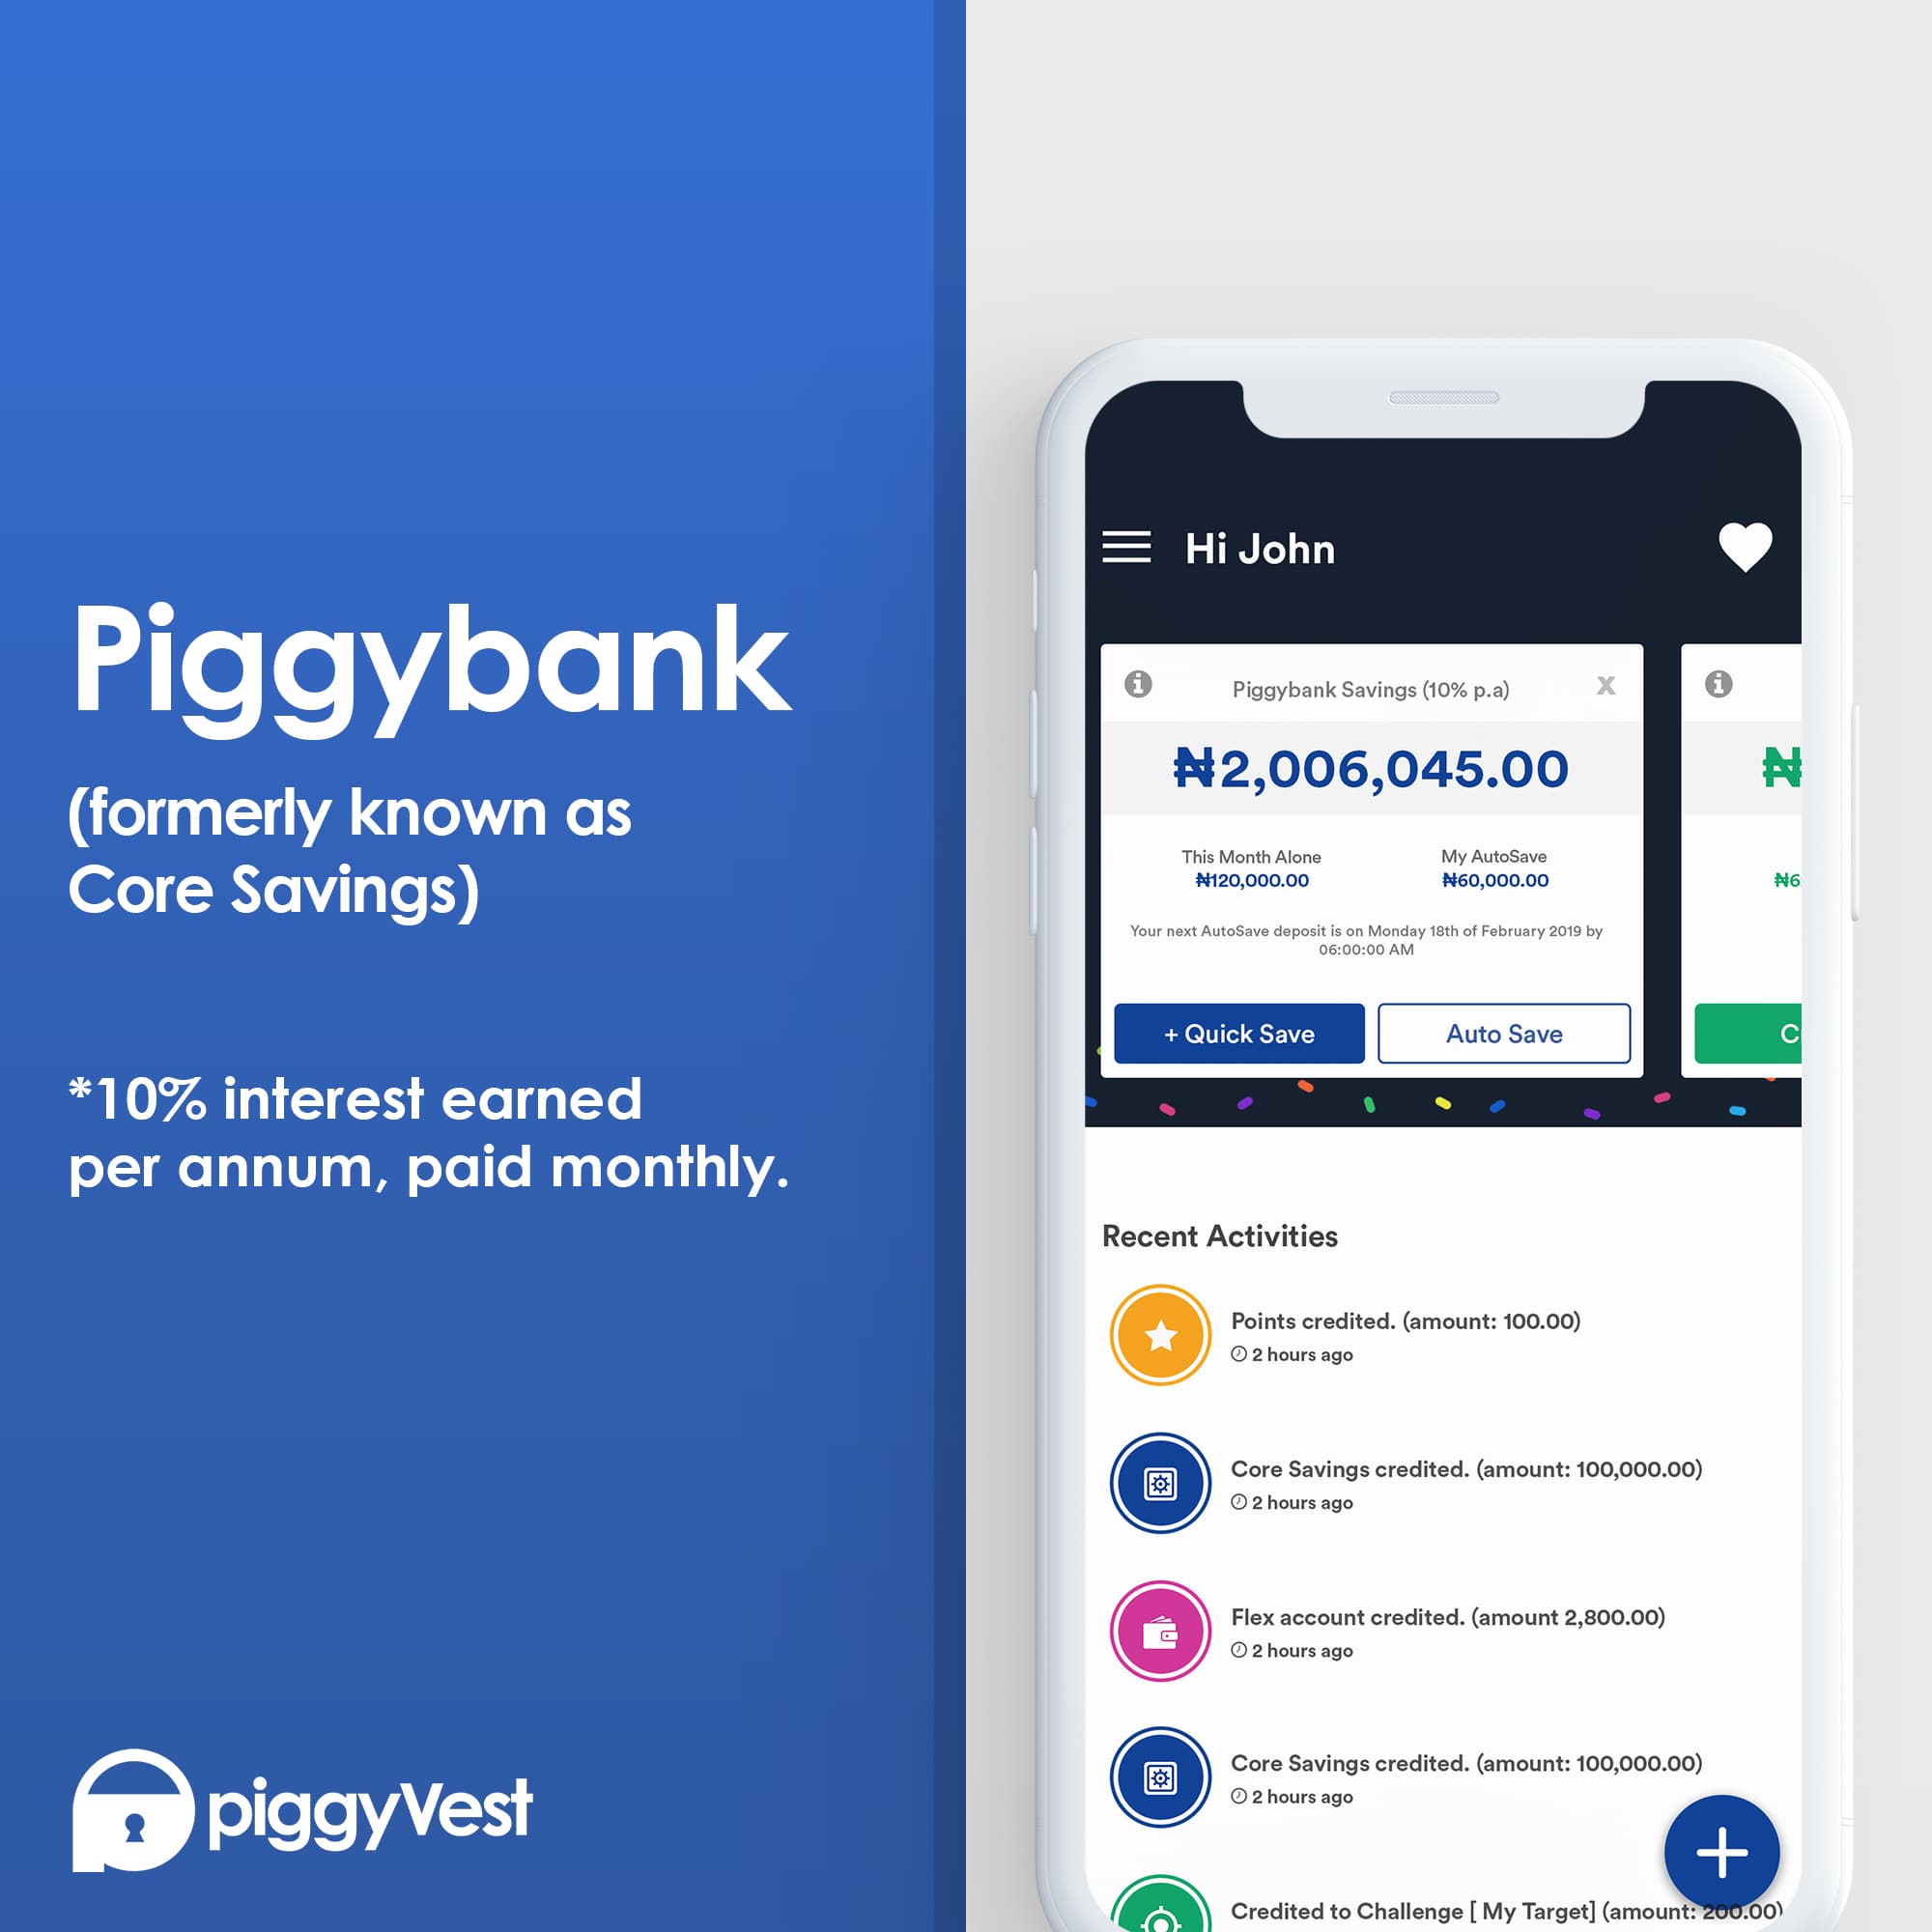 PiggyVest on Twitter: "We are still the same https://t.co/gQbh7PF0L4, just  better. To use the PiggyVest app, simply update your current app and use  the same login details. Remember your core savings? It